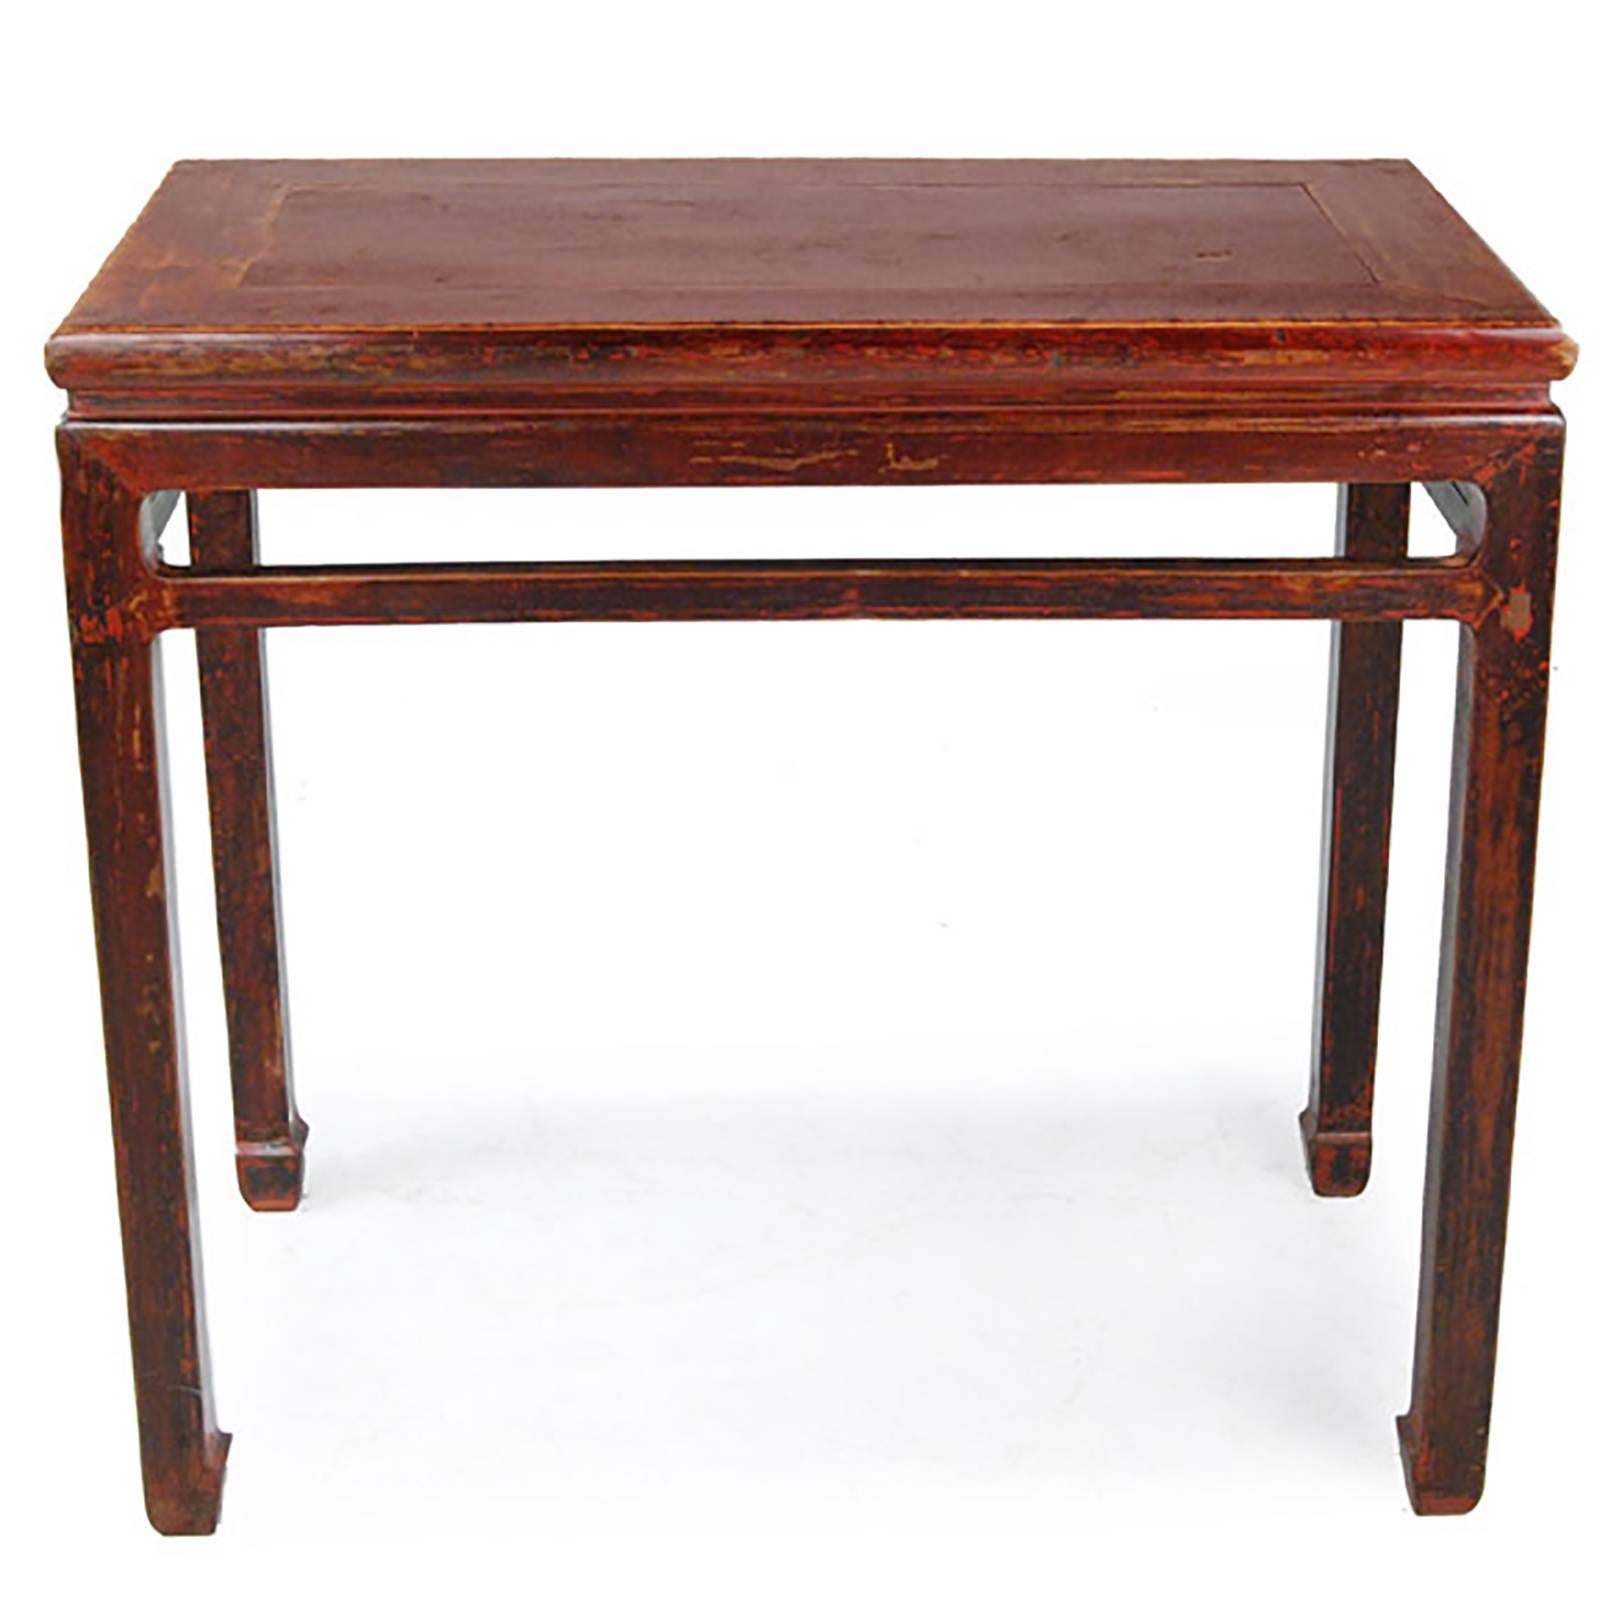 This Qing dynasty wine table is a fundamental example of essentialist Chinese antique furniture-making. In its original home, the table would have provided a serving and display space for its owners. Solid construction and minimal ornamentation